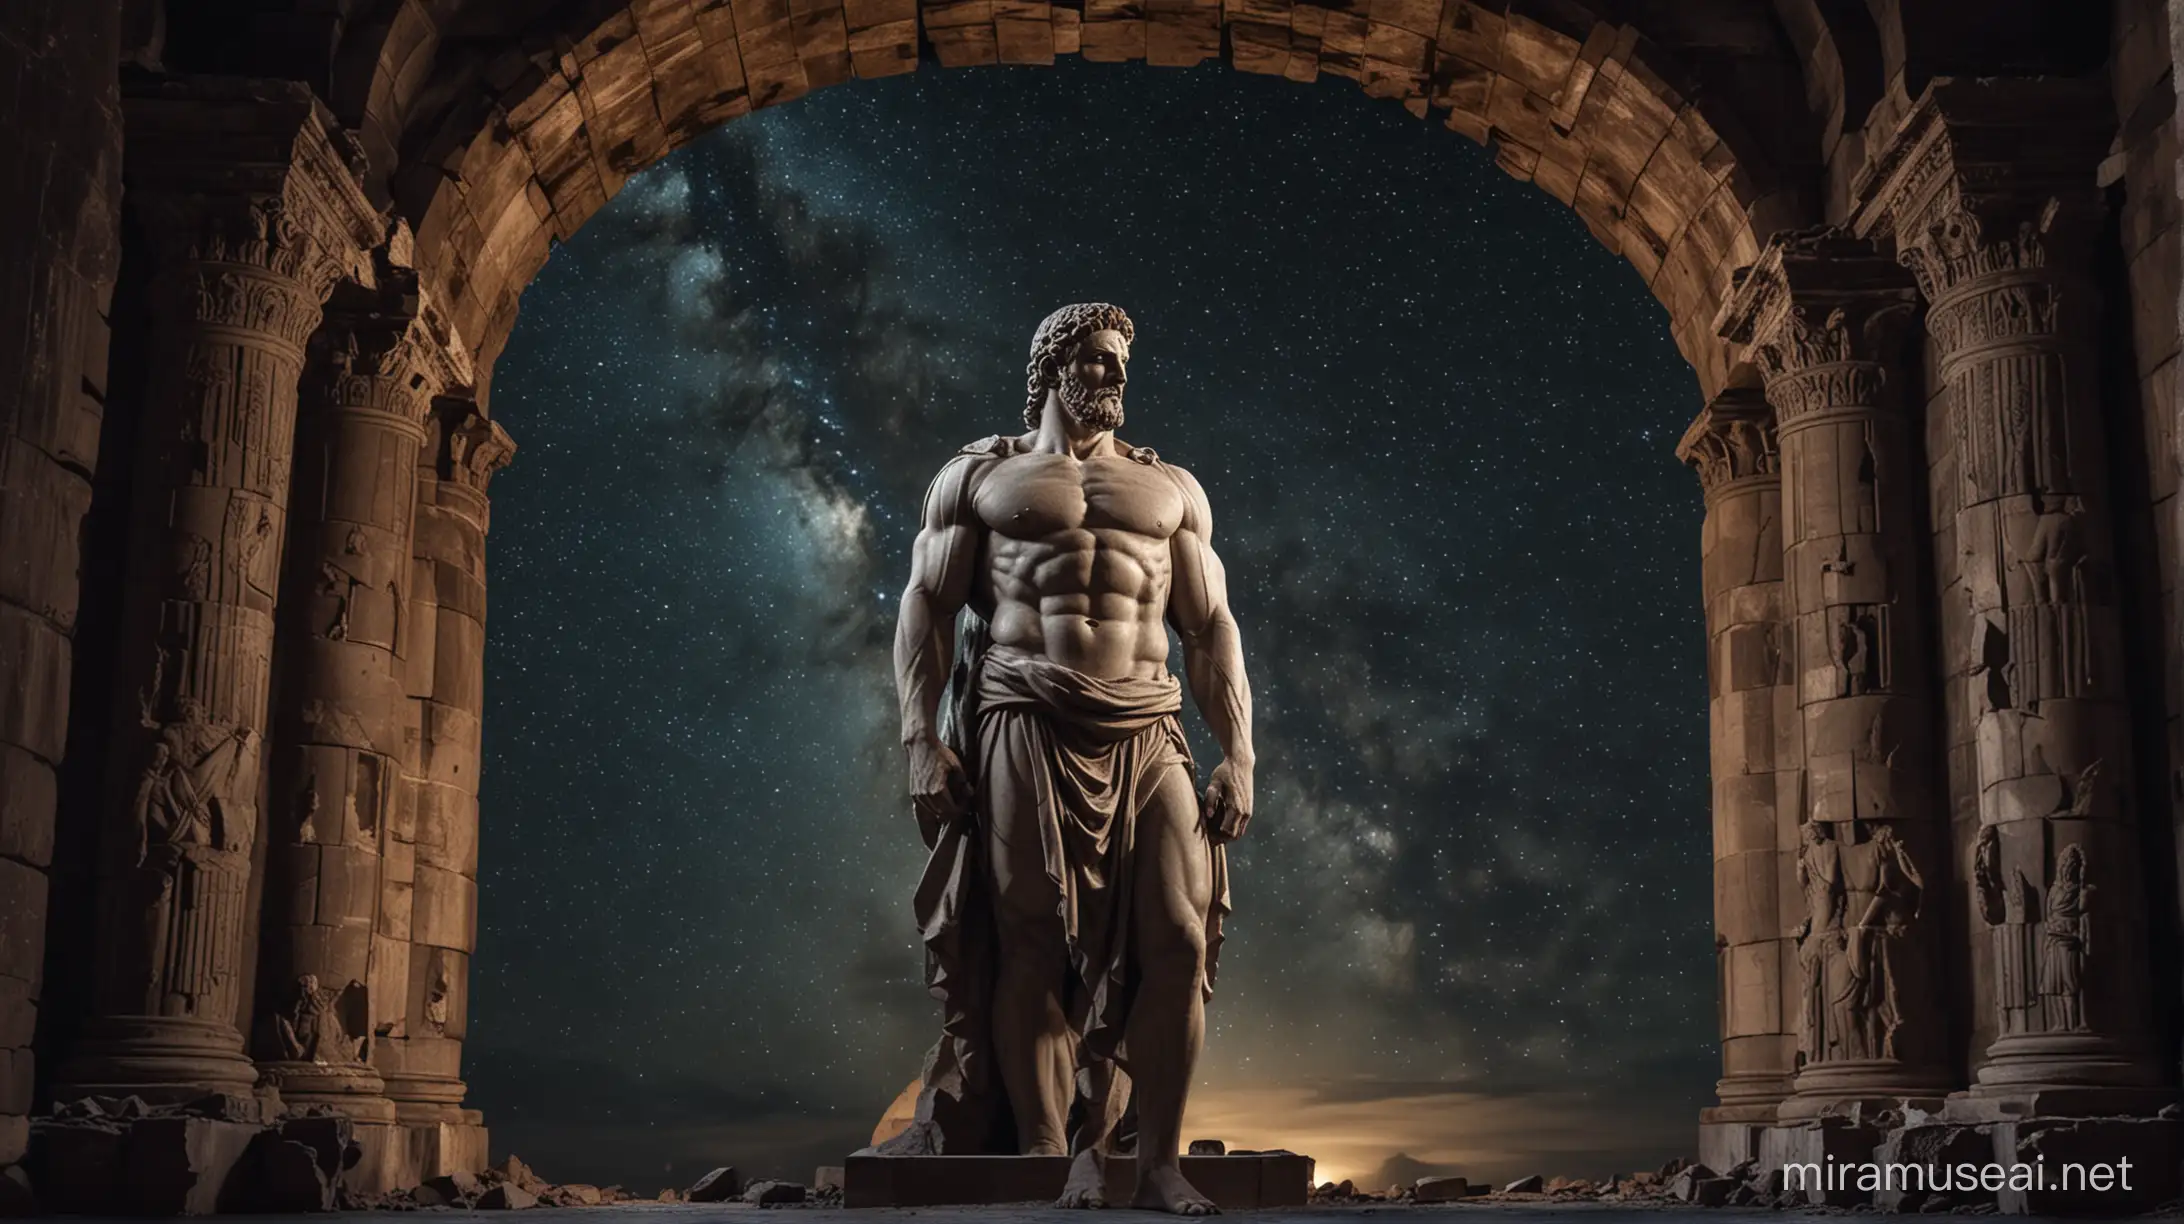 Stoic Muscular Statue Amidst Falling Stars Outside Ancient Building